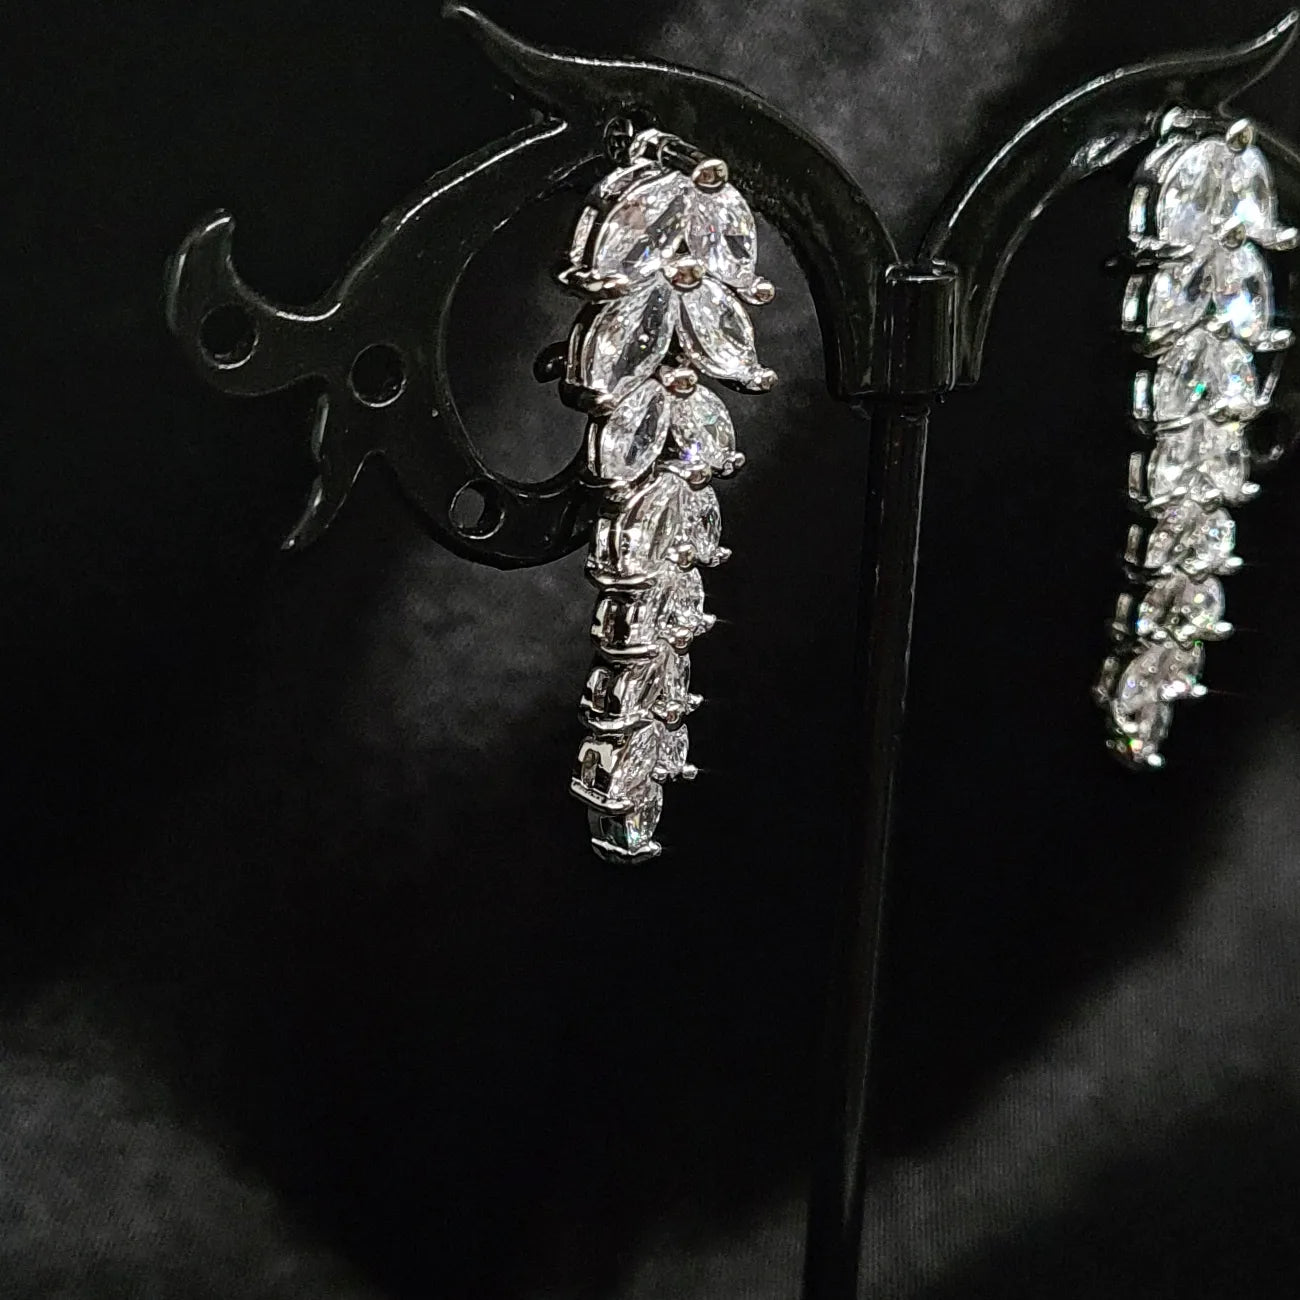 A pair of dangle earrings made of cubic zirconia. The earrings are teardrop-shaped and have a simple, elegant design. The cubic zirconia stones are clear and sparkling. The earrings are sitting on a black cloth.